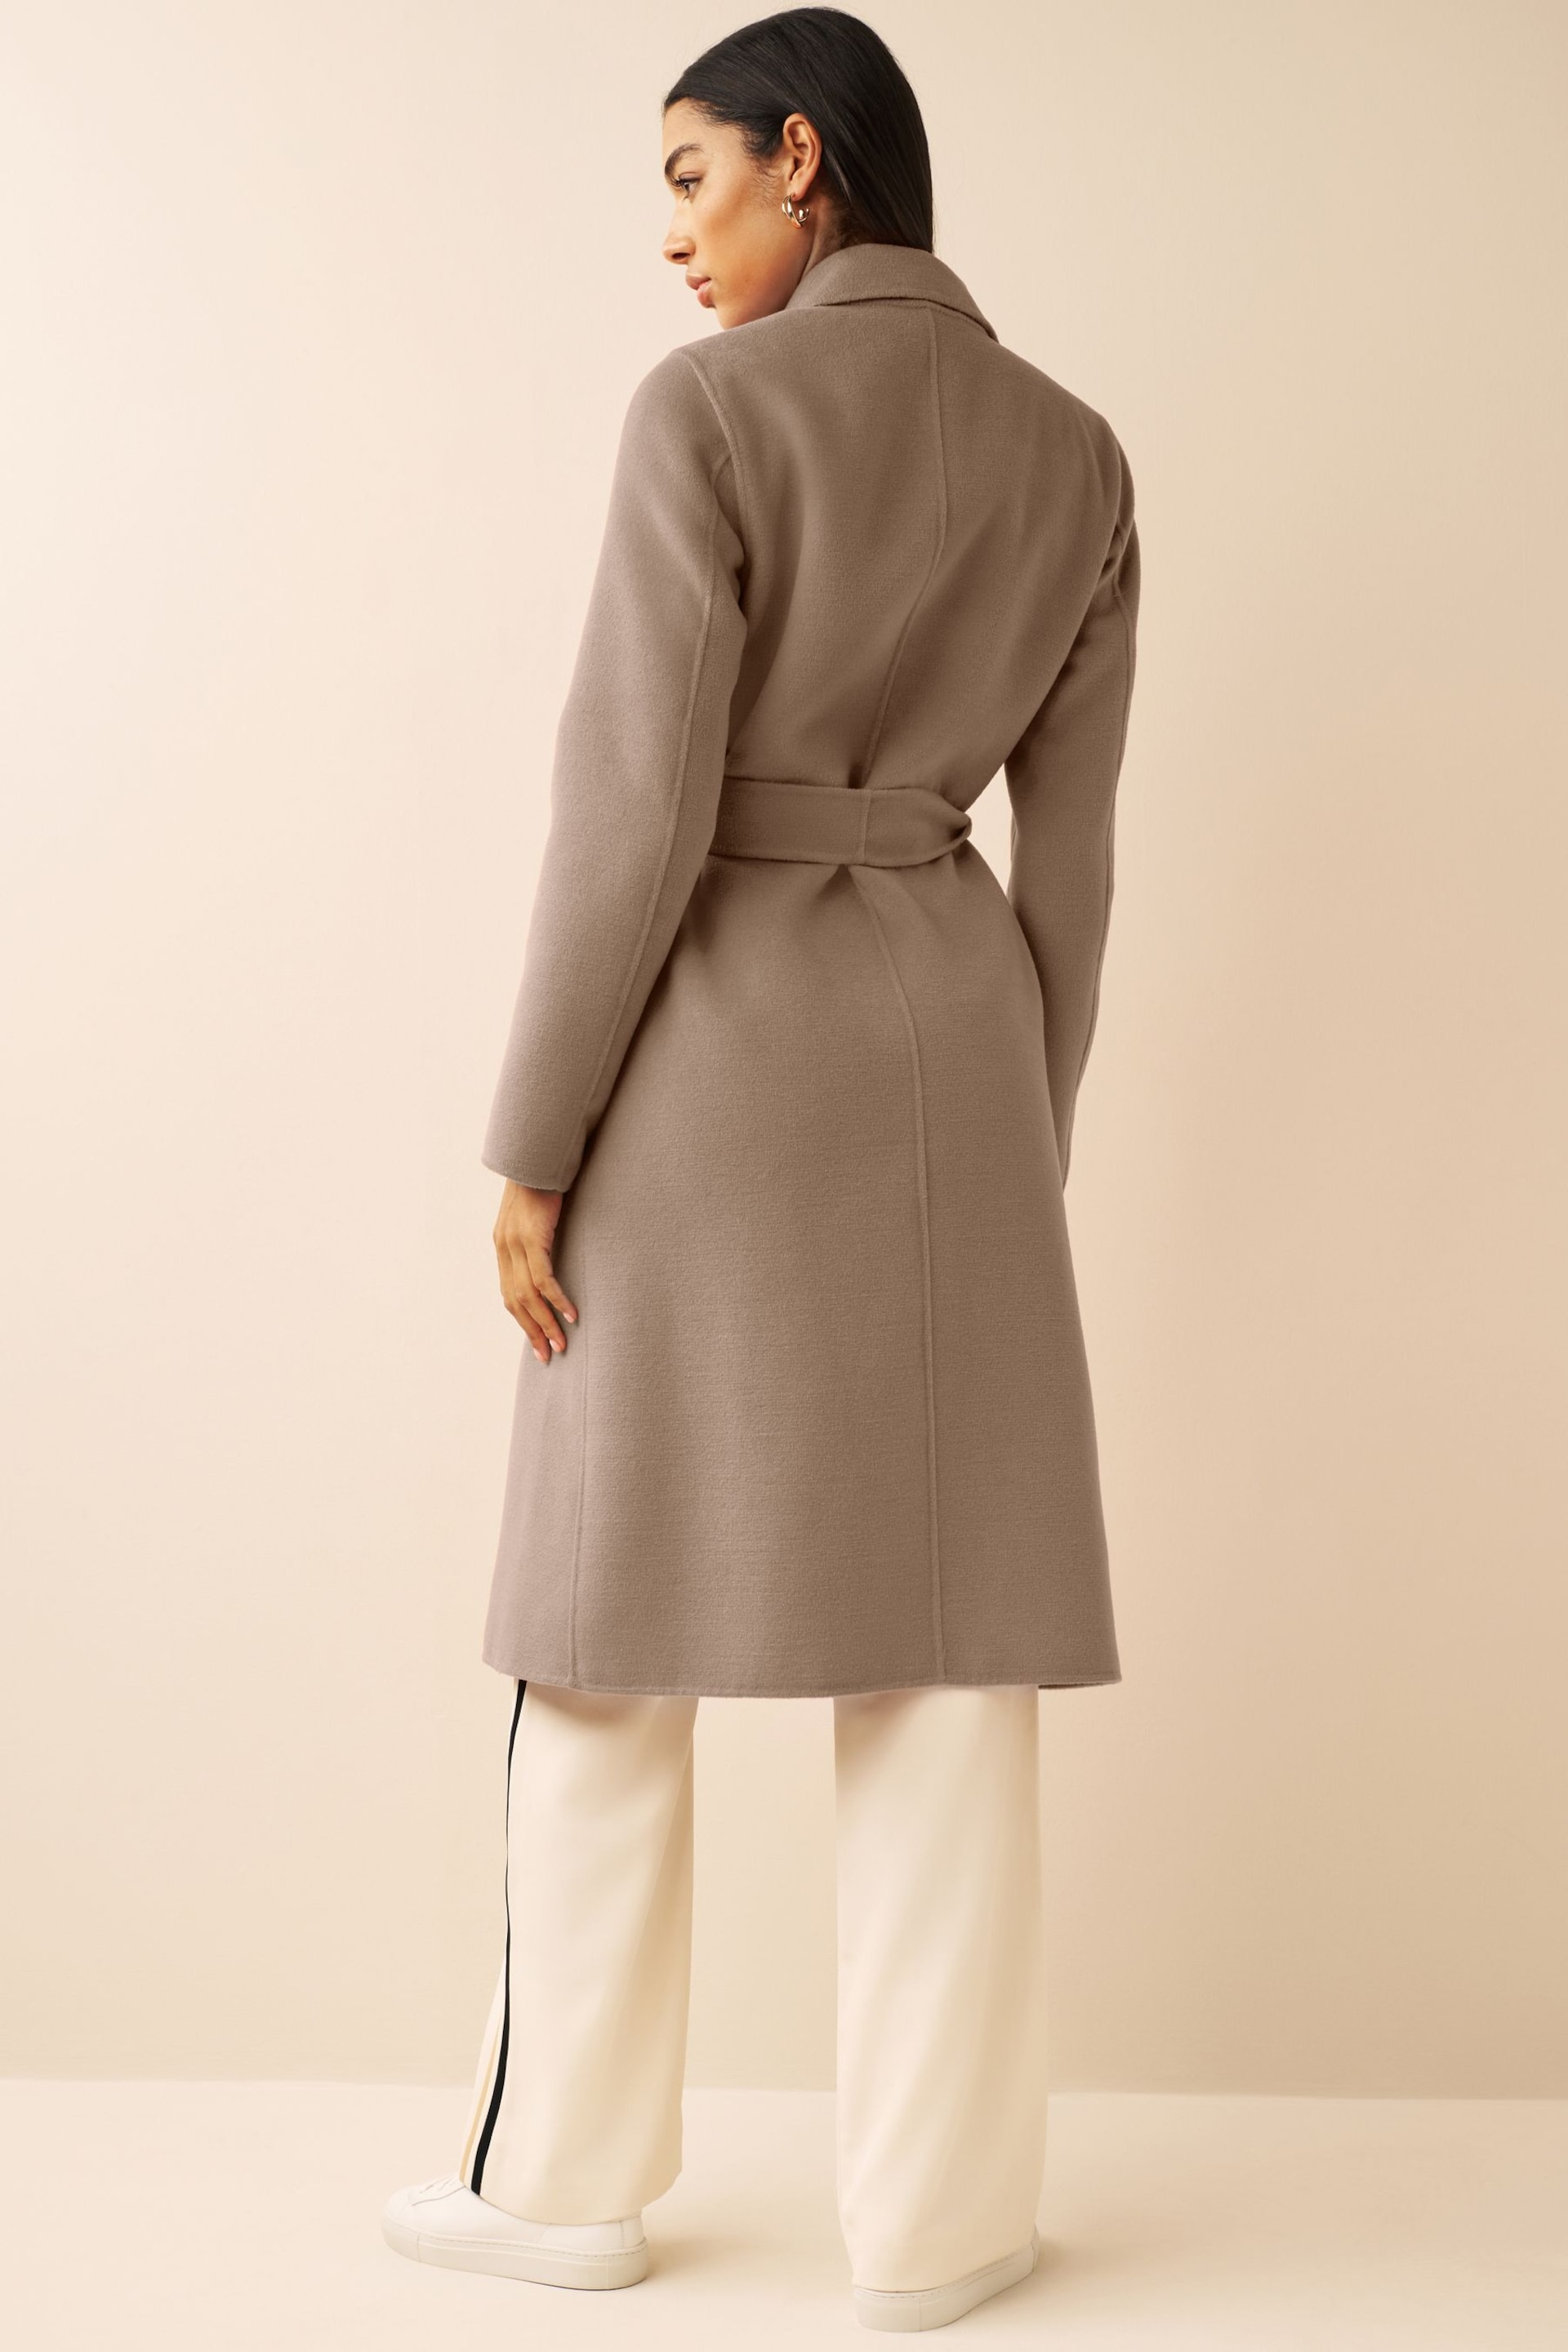 Emme by Marella Neutral Antonia Jersey Trench Coat - Image 2 of 6